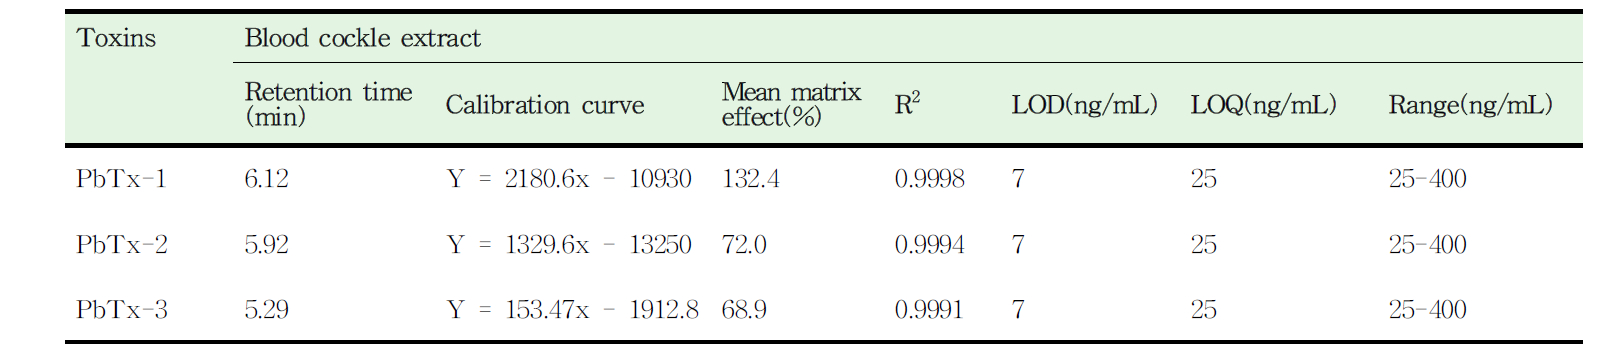 Calibration curves, LOD and LOQ of the NSP toxins in blood cockle extract